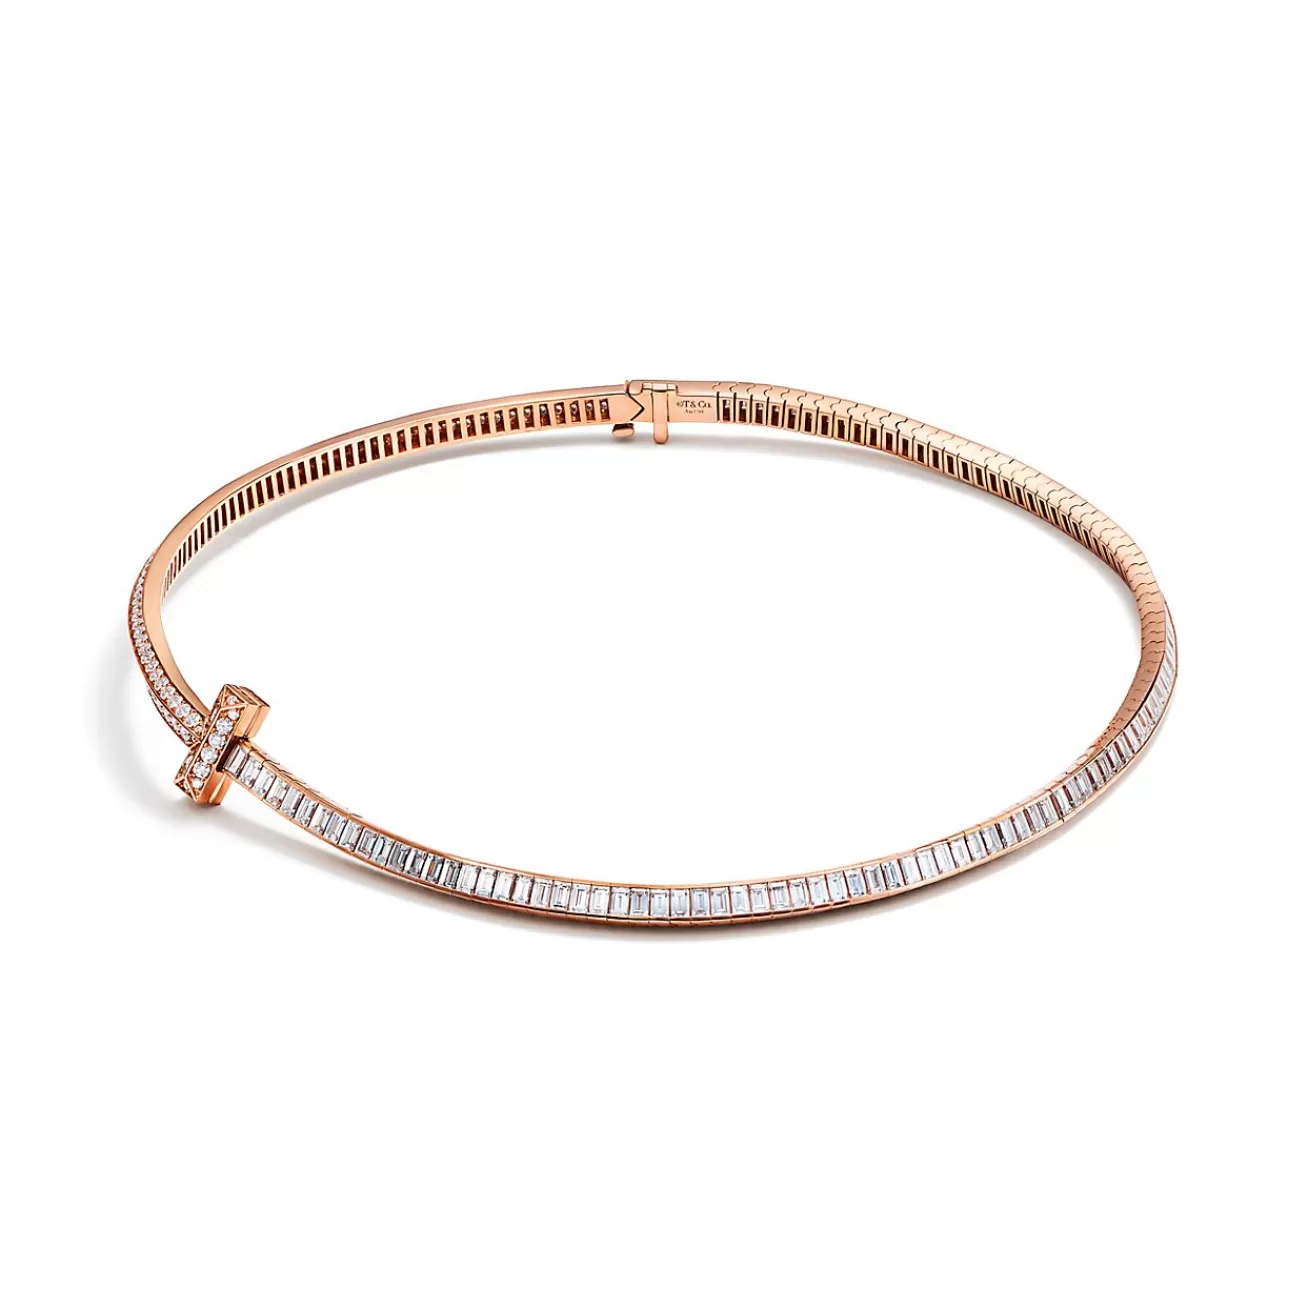 Tiffany & Co. Tiffany T T1 diamond necklace in 18k rose gold. | ^ Necklaces & Pendants | Rose Gold Jewelry